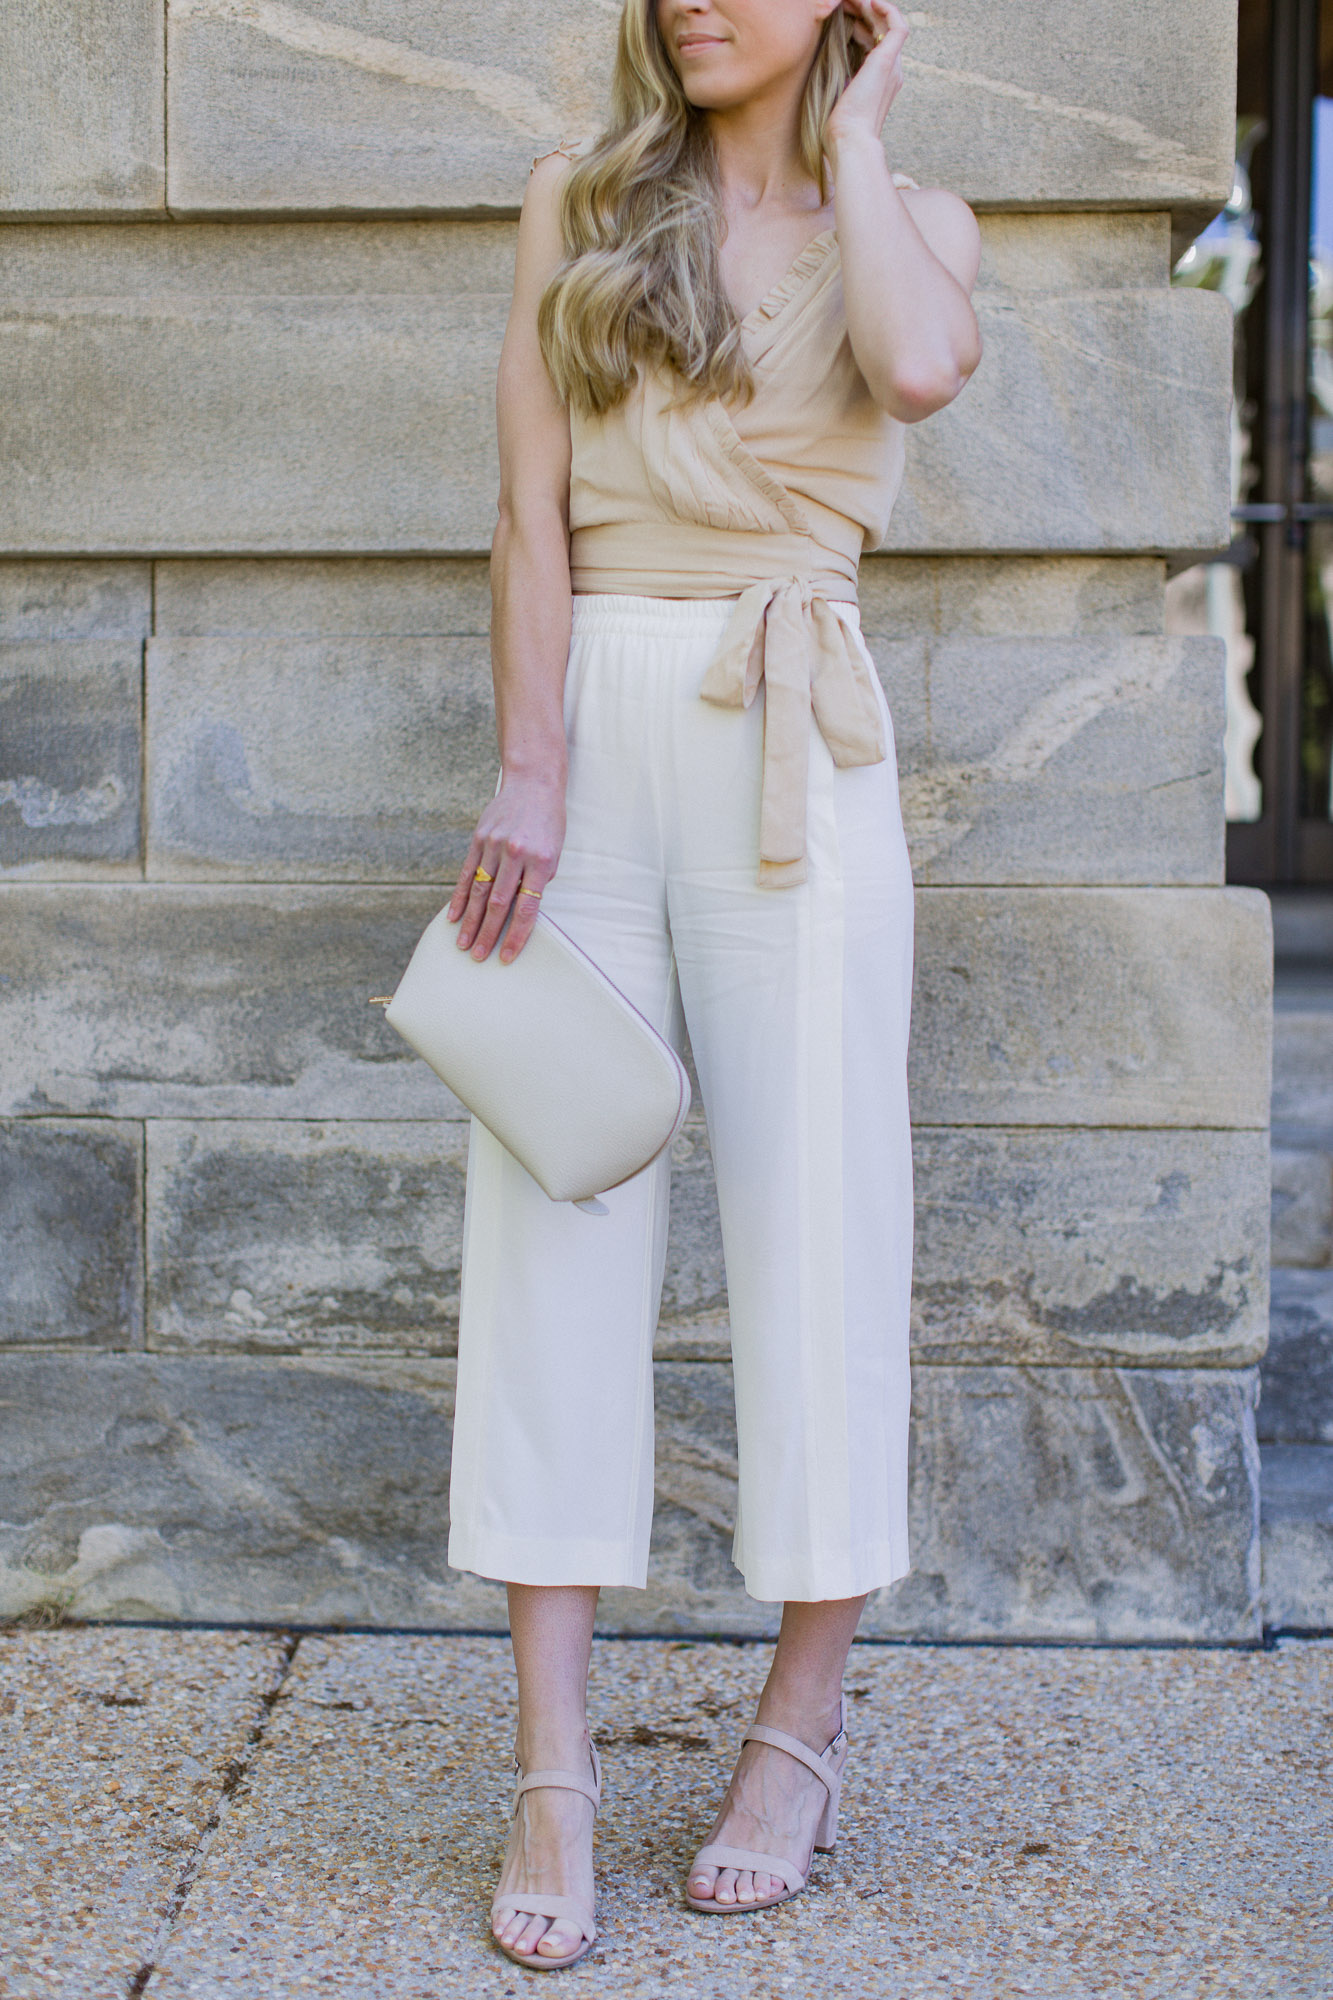 An All-Neutral Look for Spring